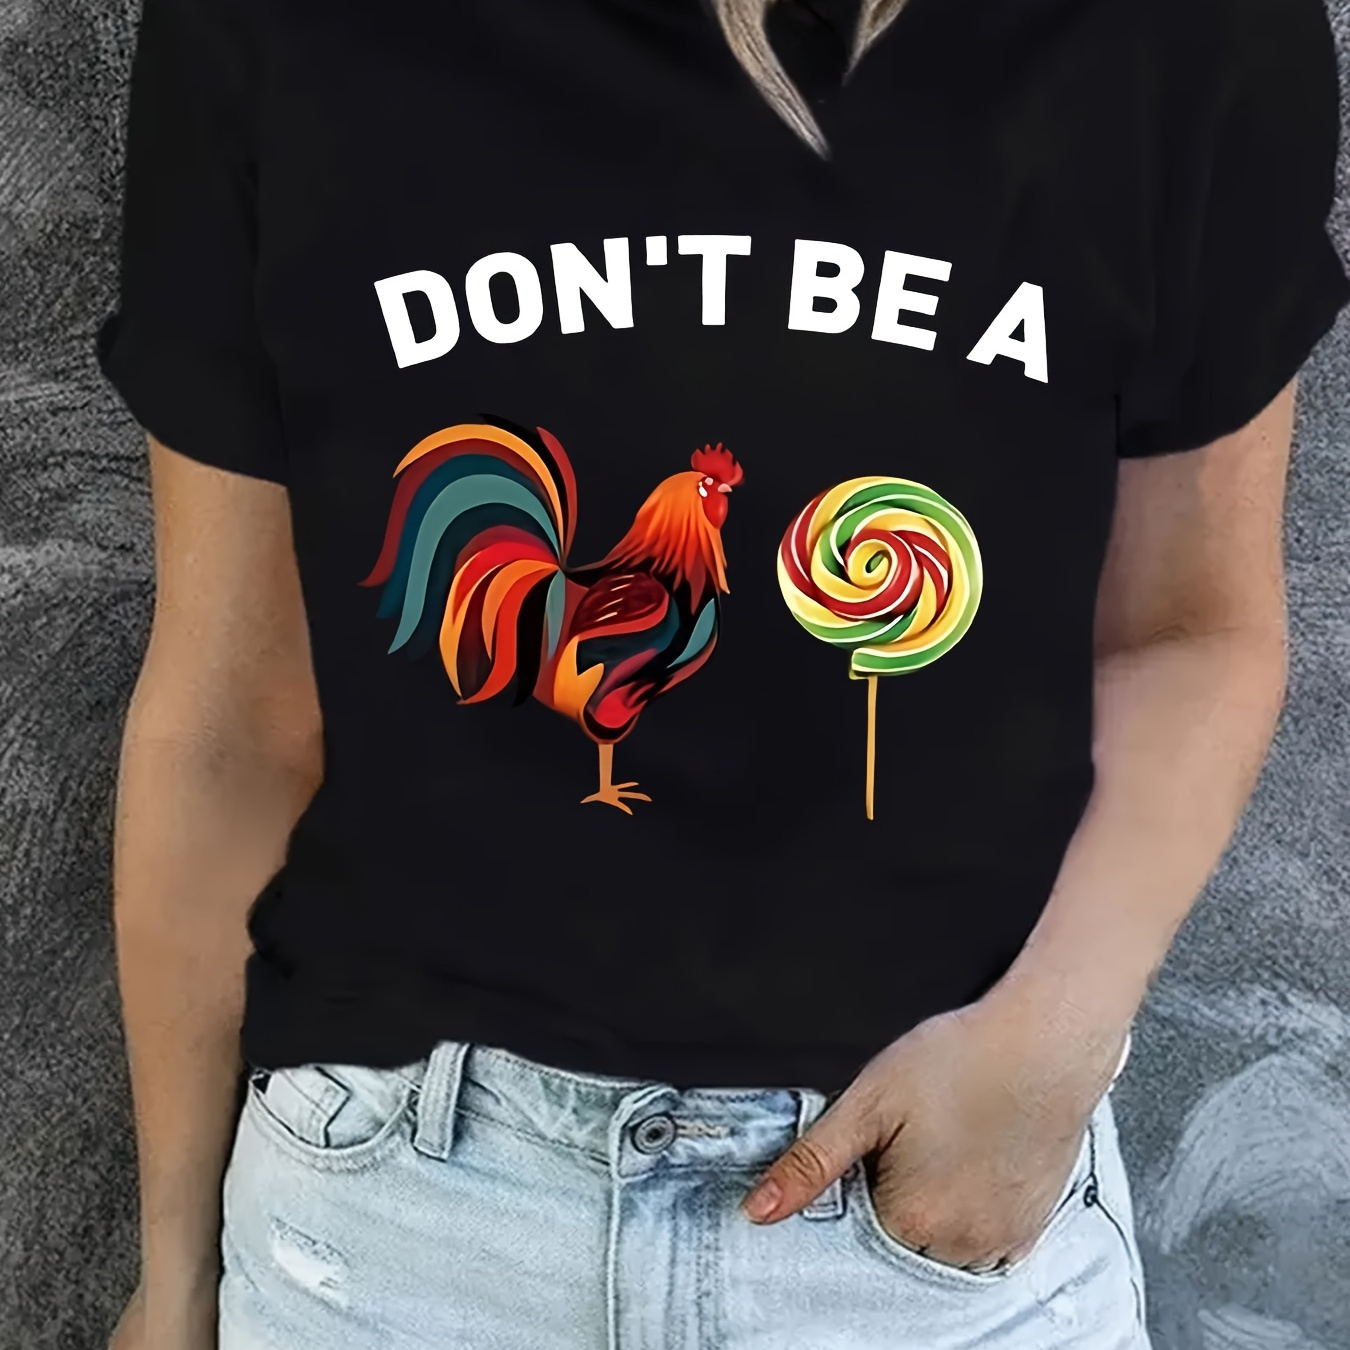 

Colorful Chickens & Lollipop Print T-shirt, Short Sleeve Crew Neck Casual Top For Summer & Spring, Women's Clothing